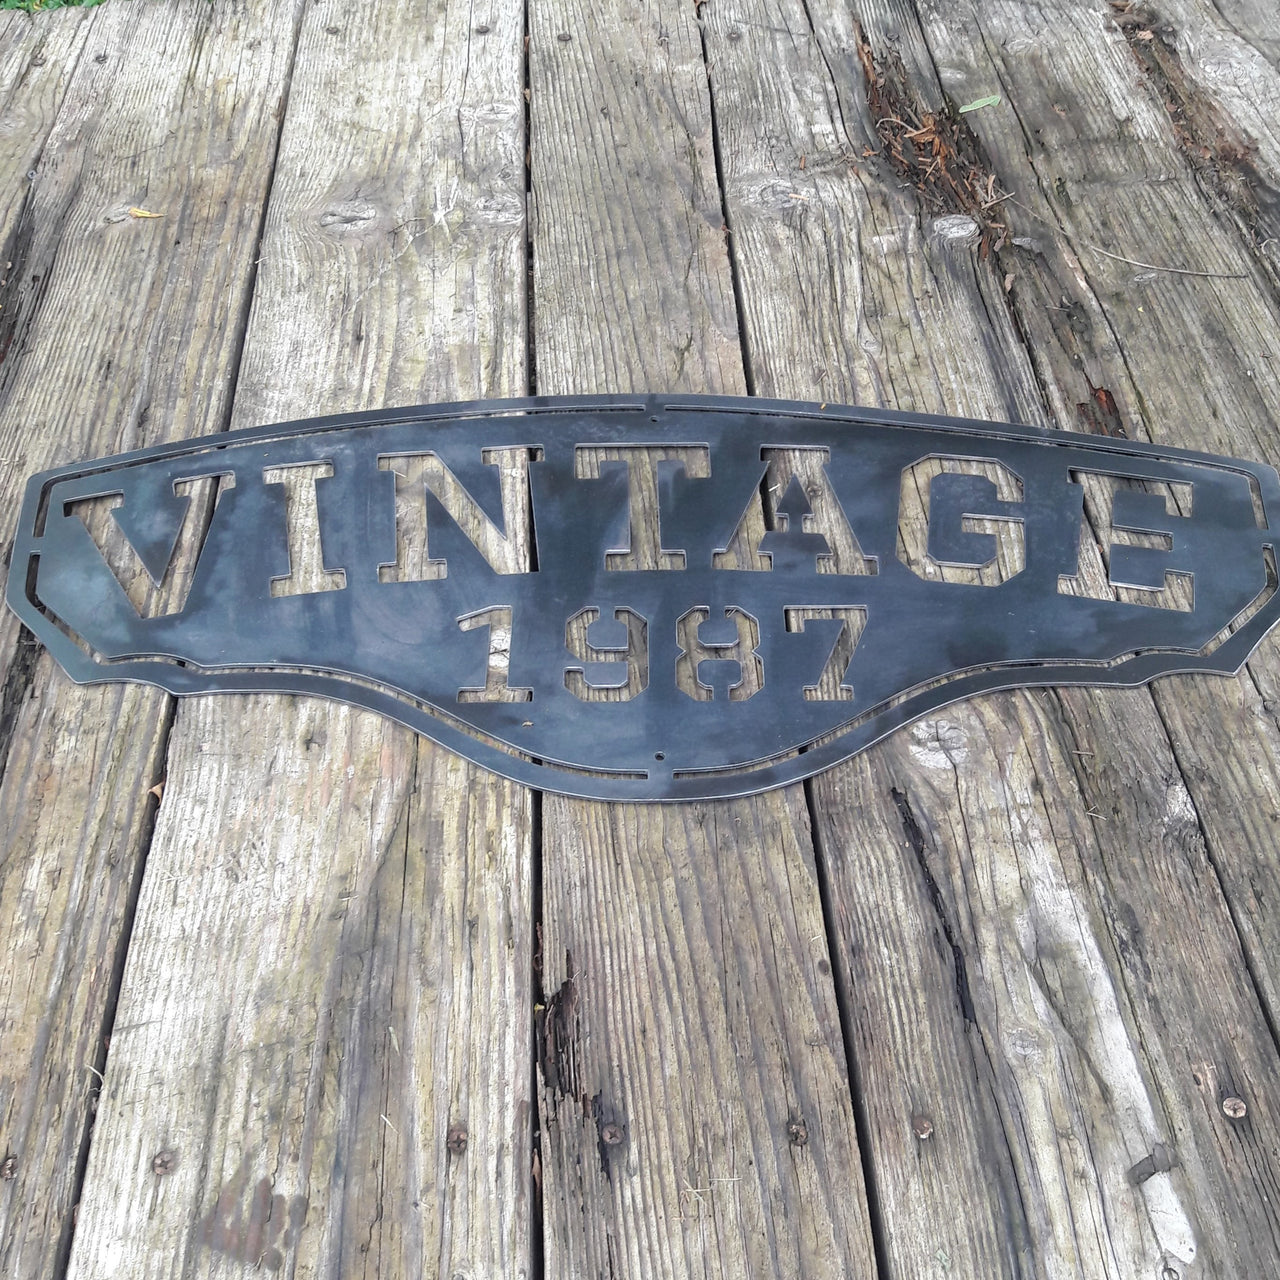 This personalized metal sign reads, "VINTAGE1987".